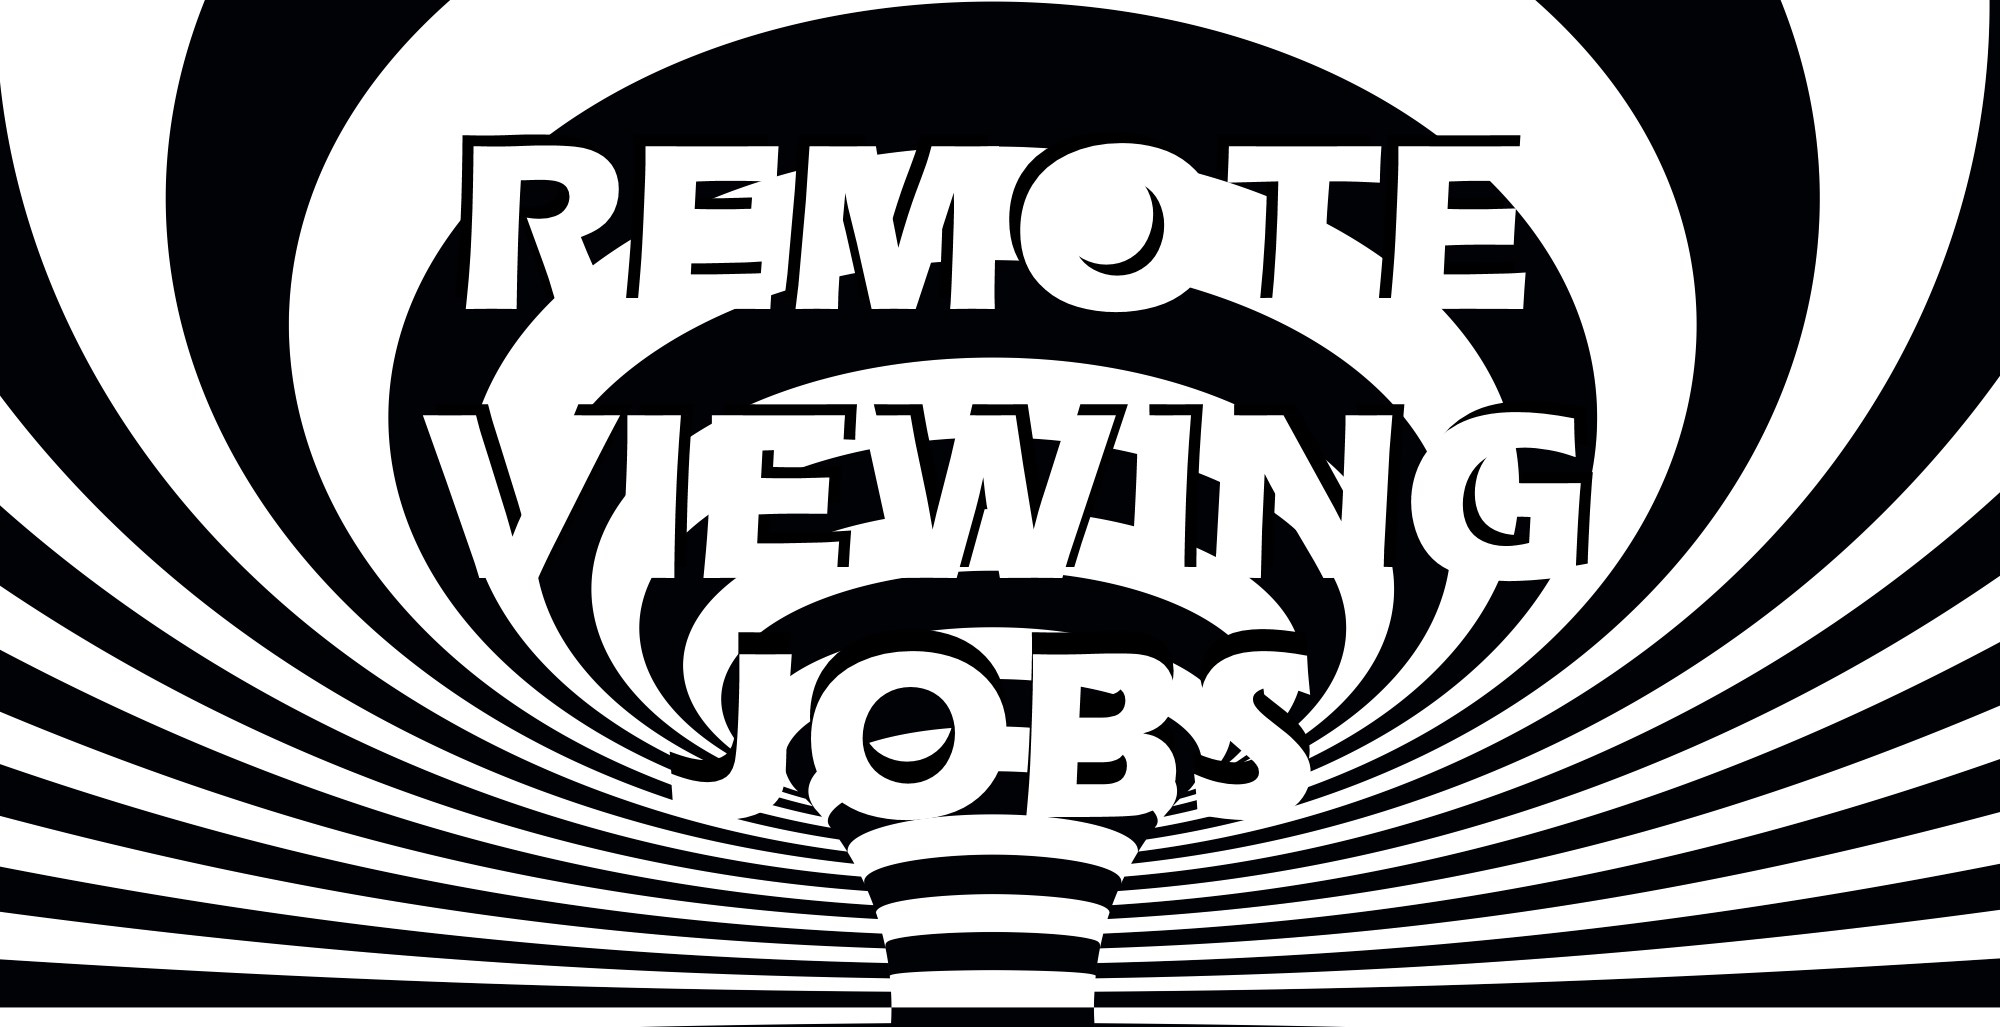 Work as a Remote Viewer at The Soul Rider LLC, they\'re Hiring!